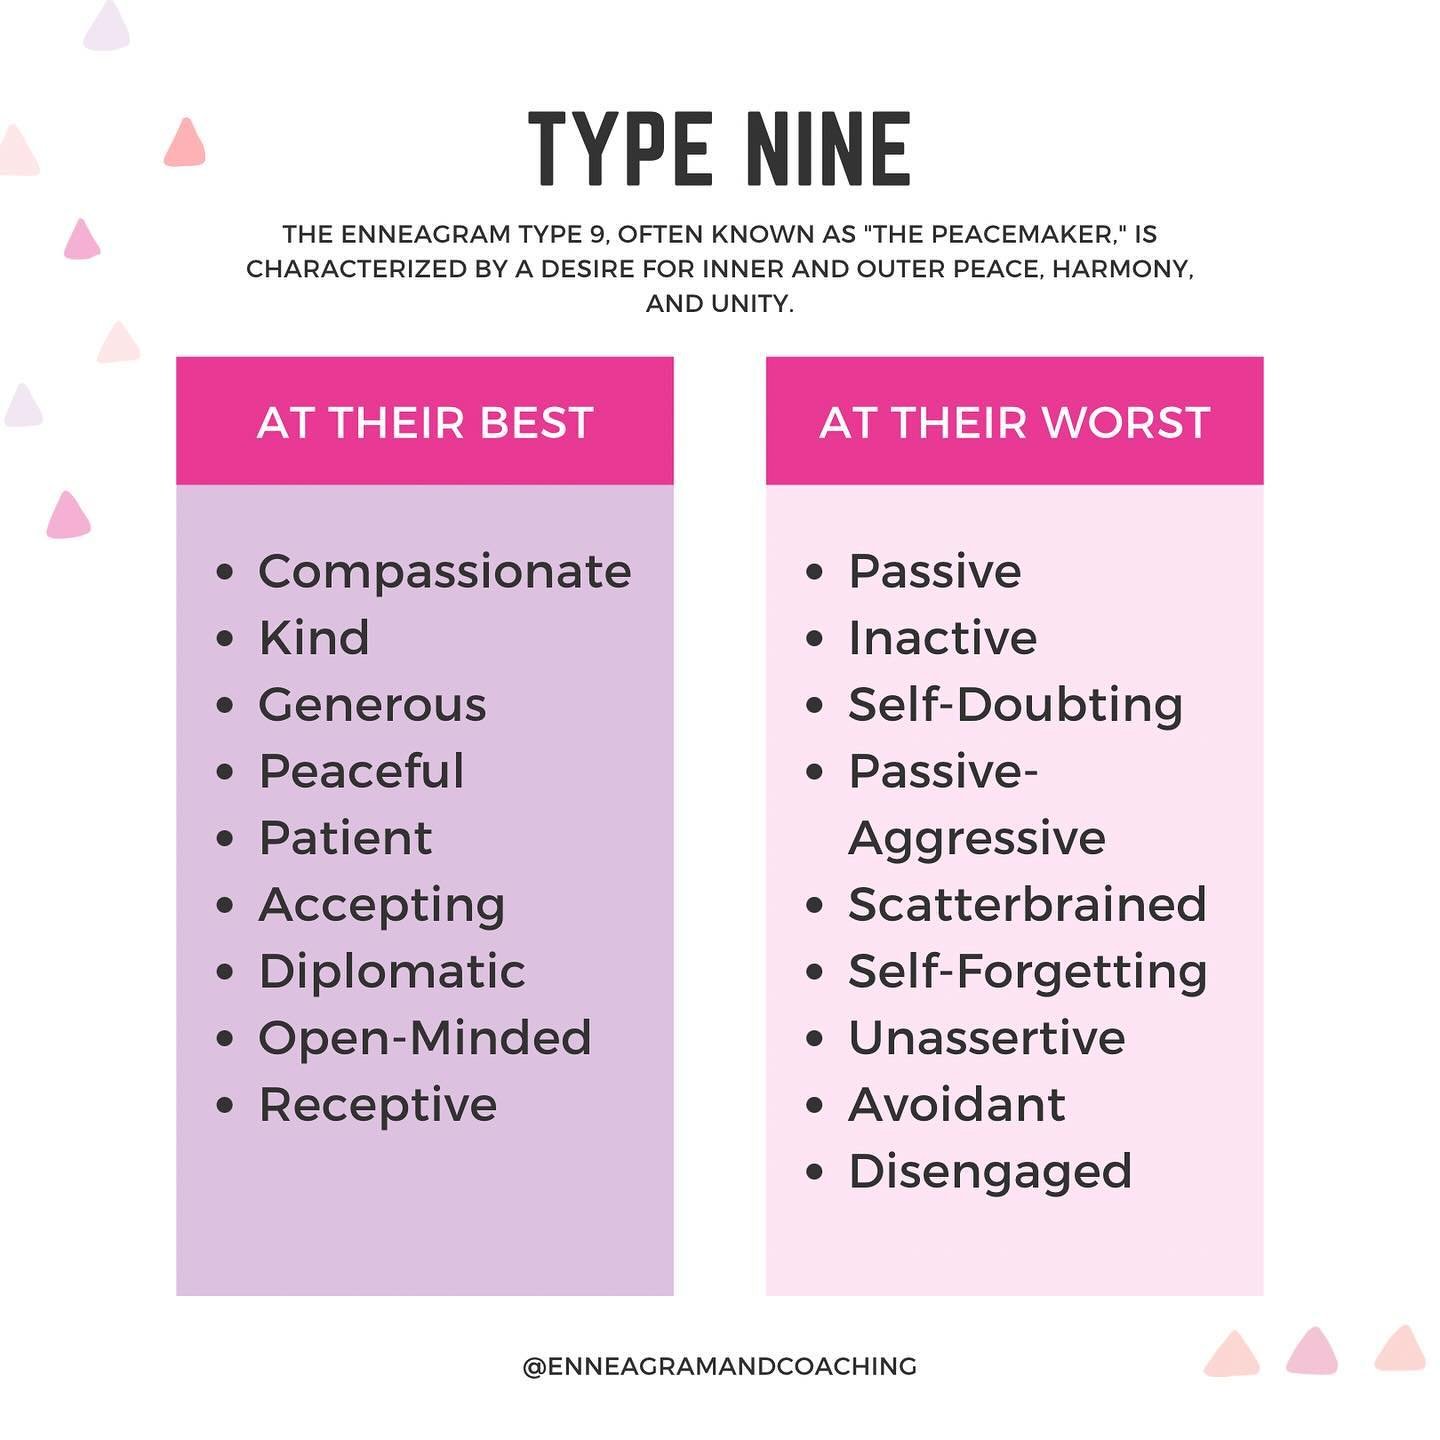 ✨Each Enneagram Type at their absolute BEST and absolute WORST. You probably won&rsquo;t identify with all of the words in each category. But this can be a good reference to knowing how your type shows up depending on the situation. Happy Monday! Hop